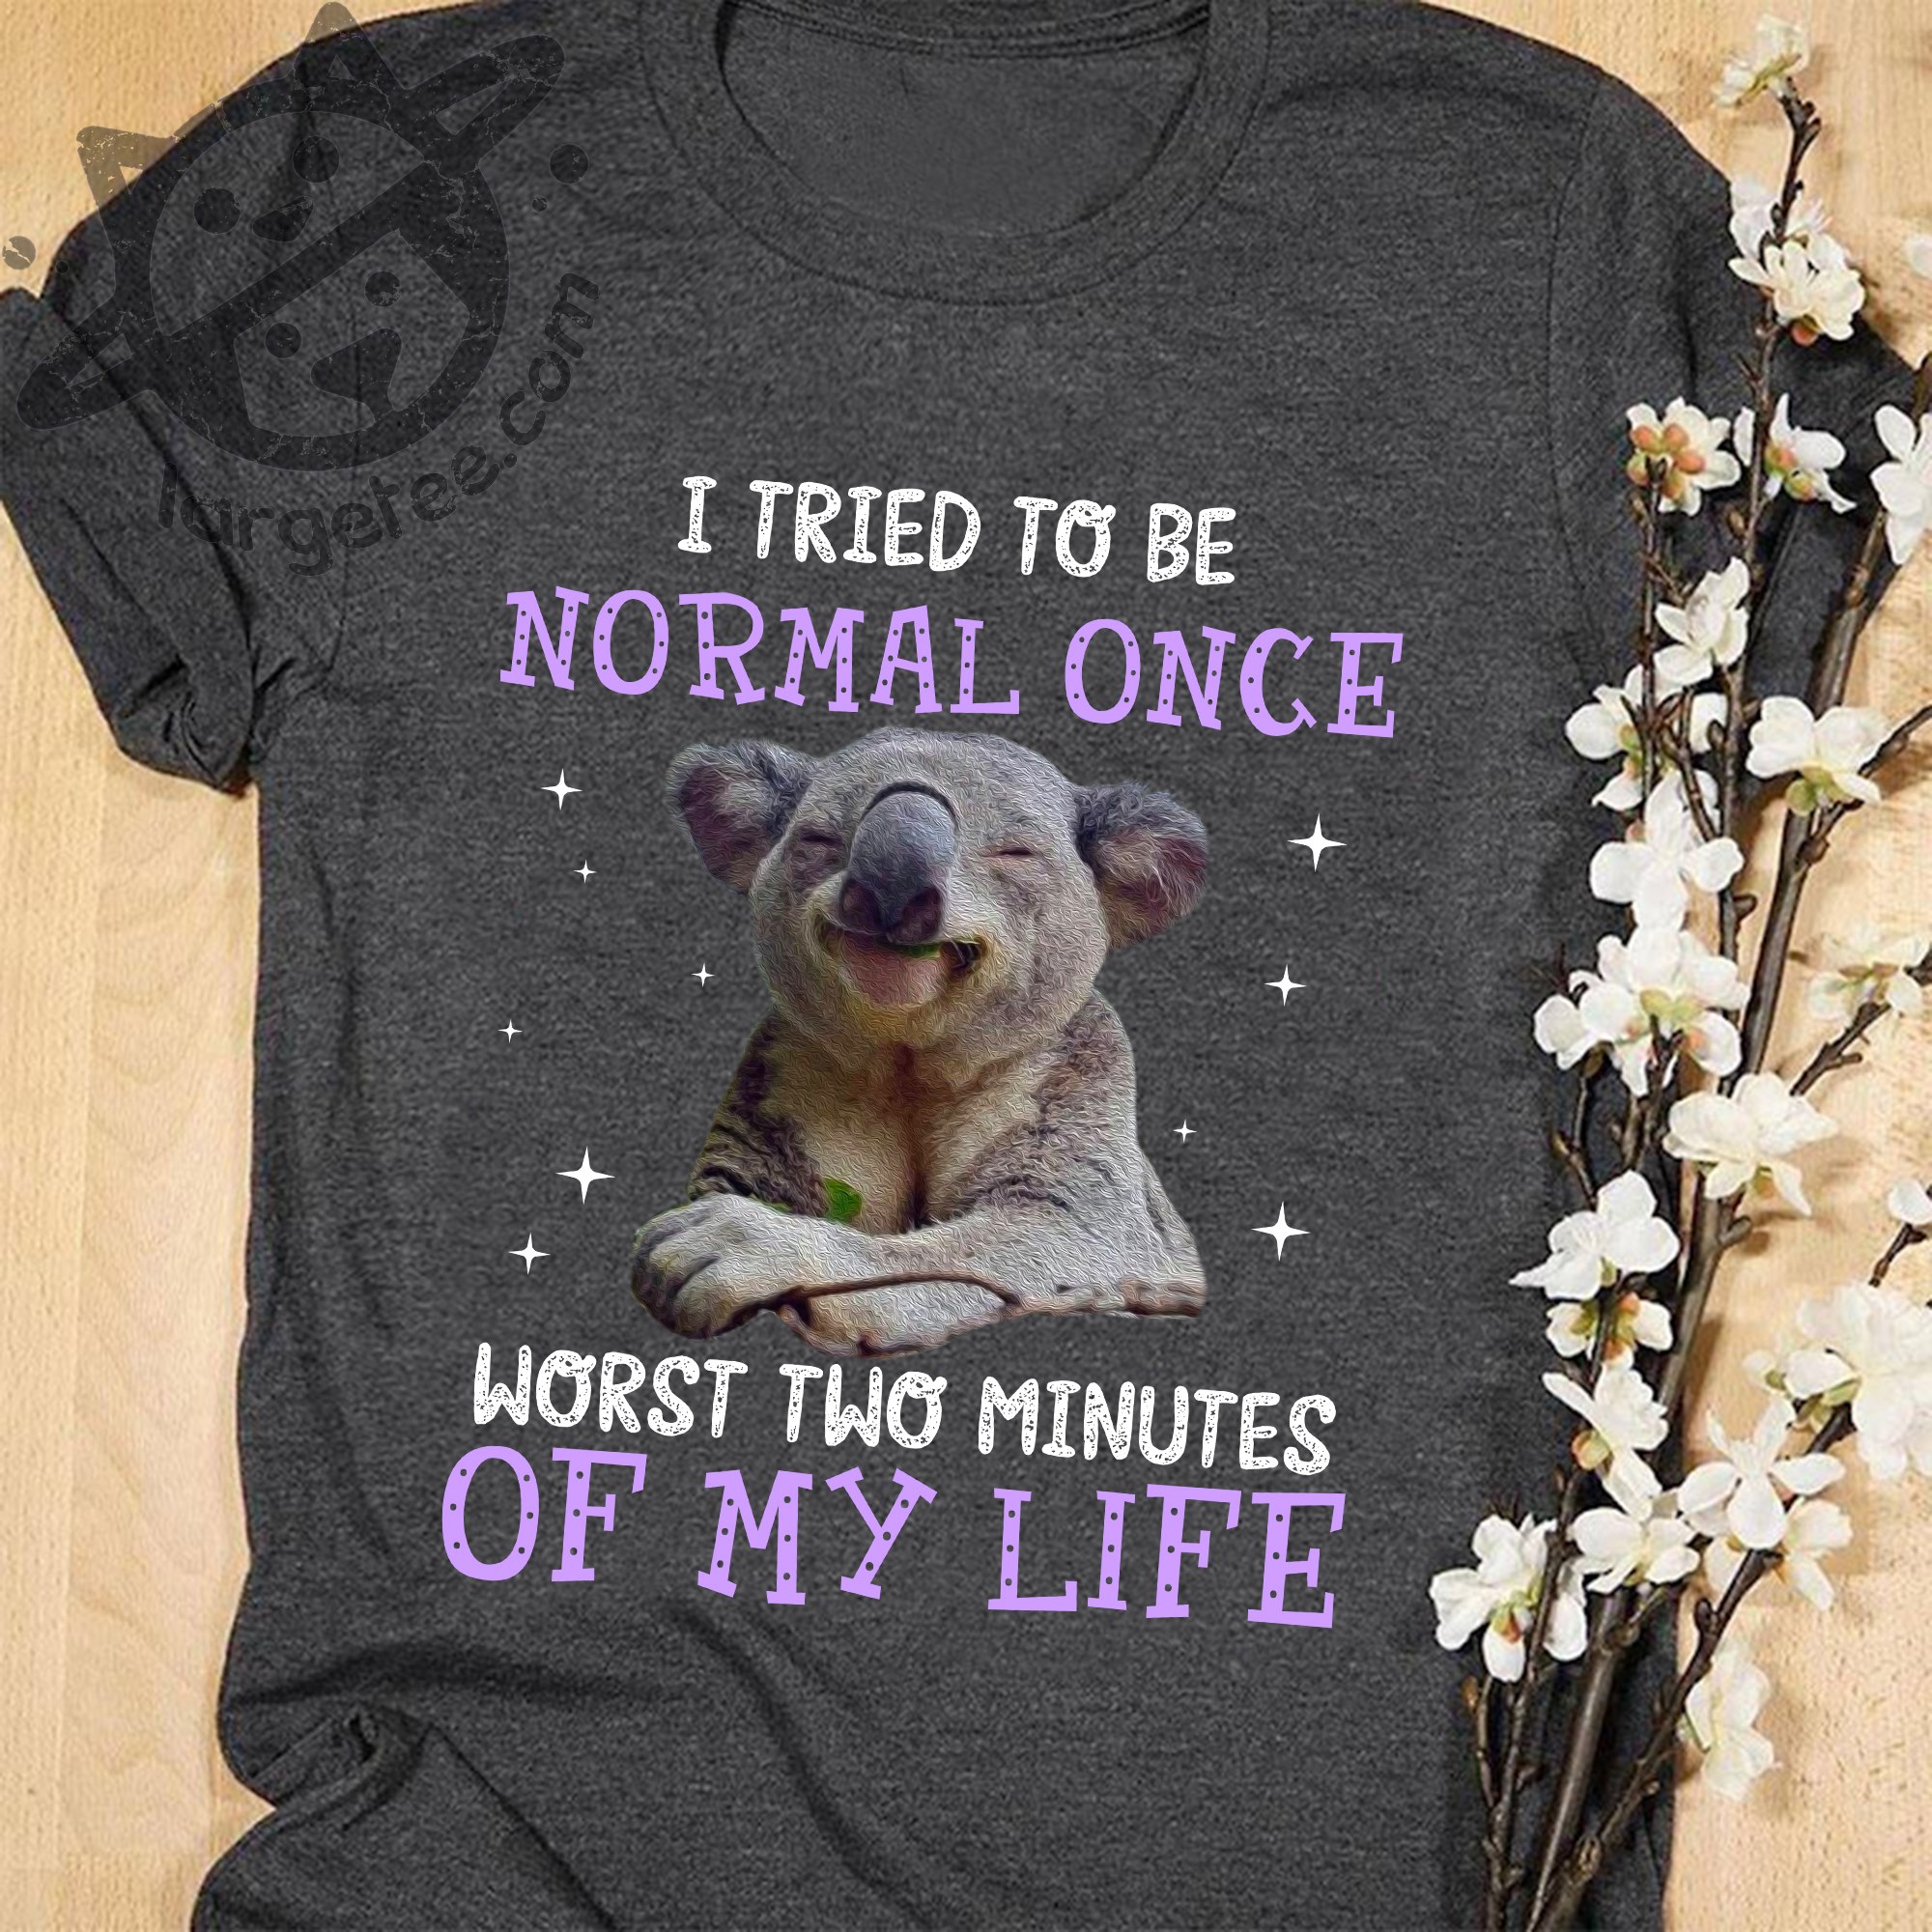 I tried to be normal once worst two minutes of my life - Koala bear